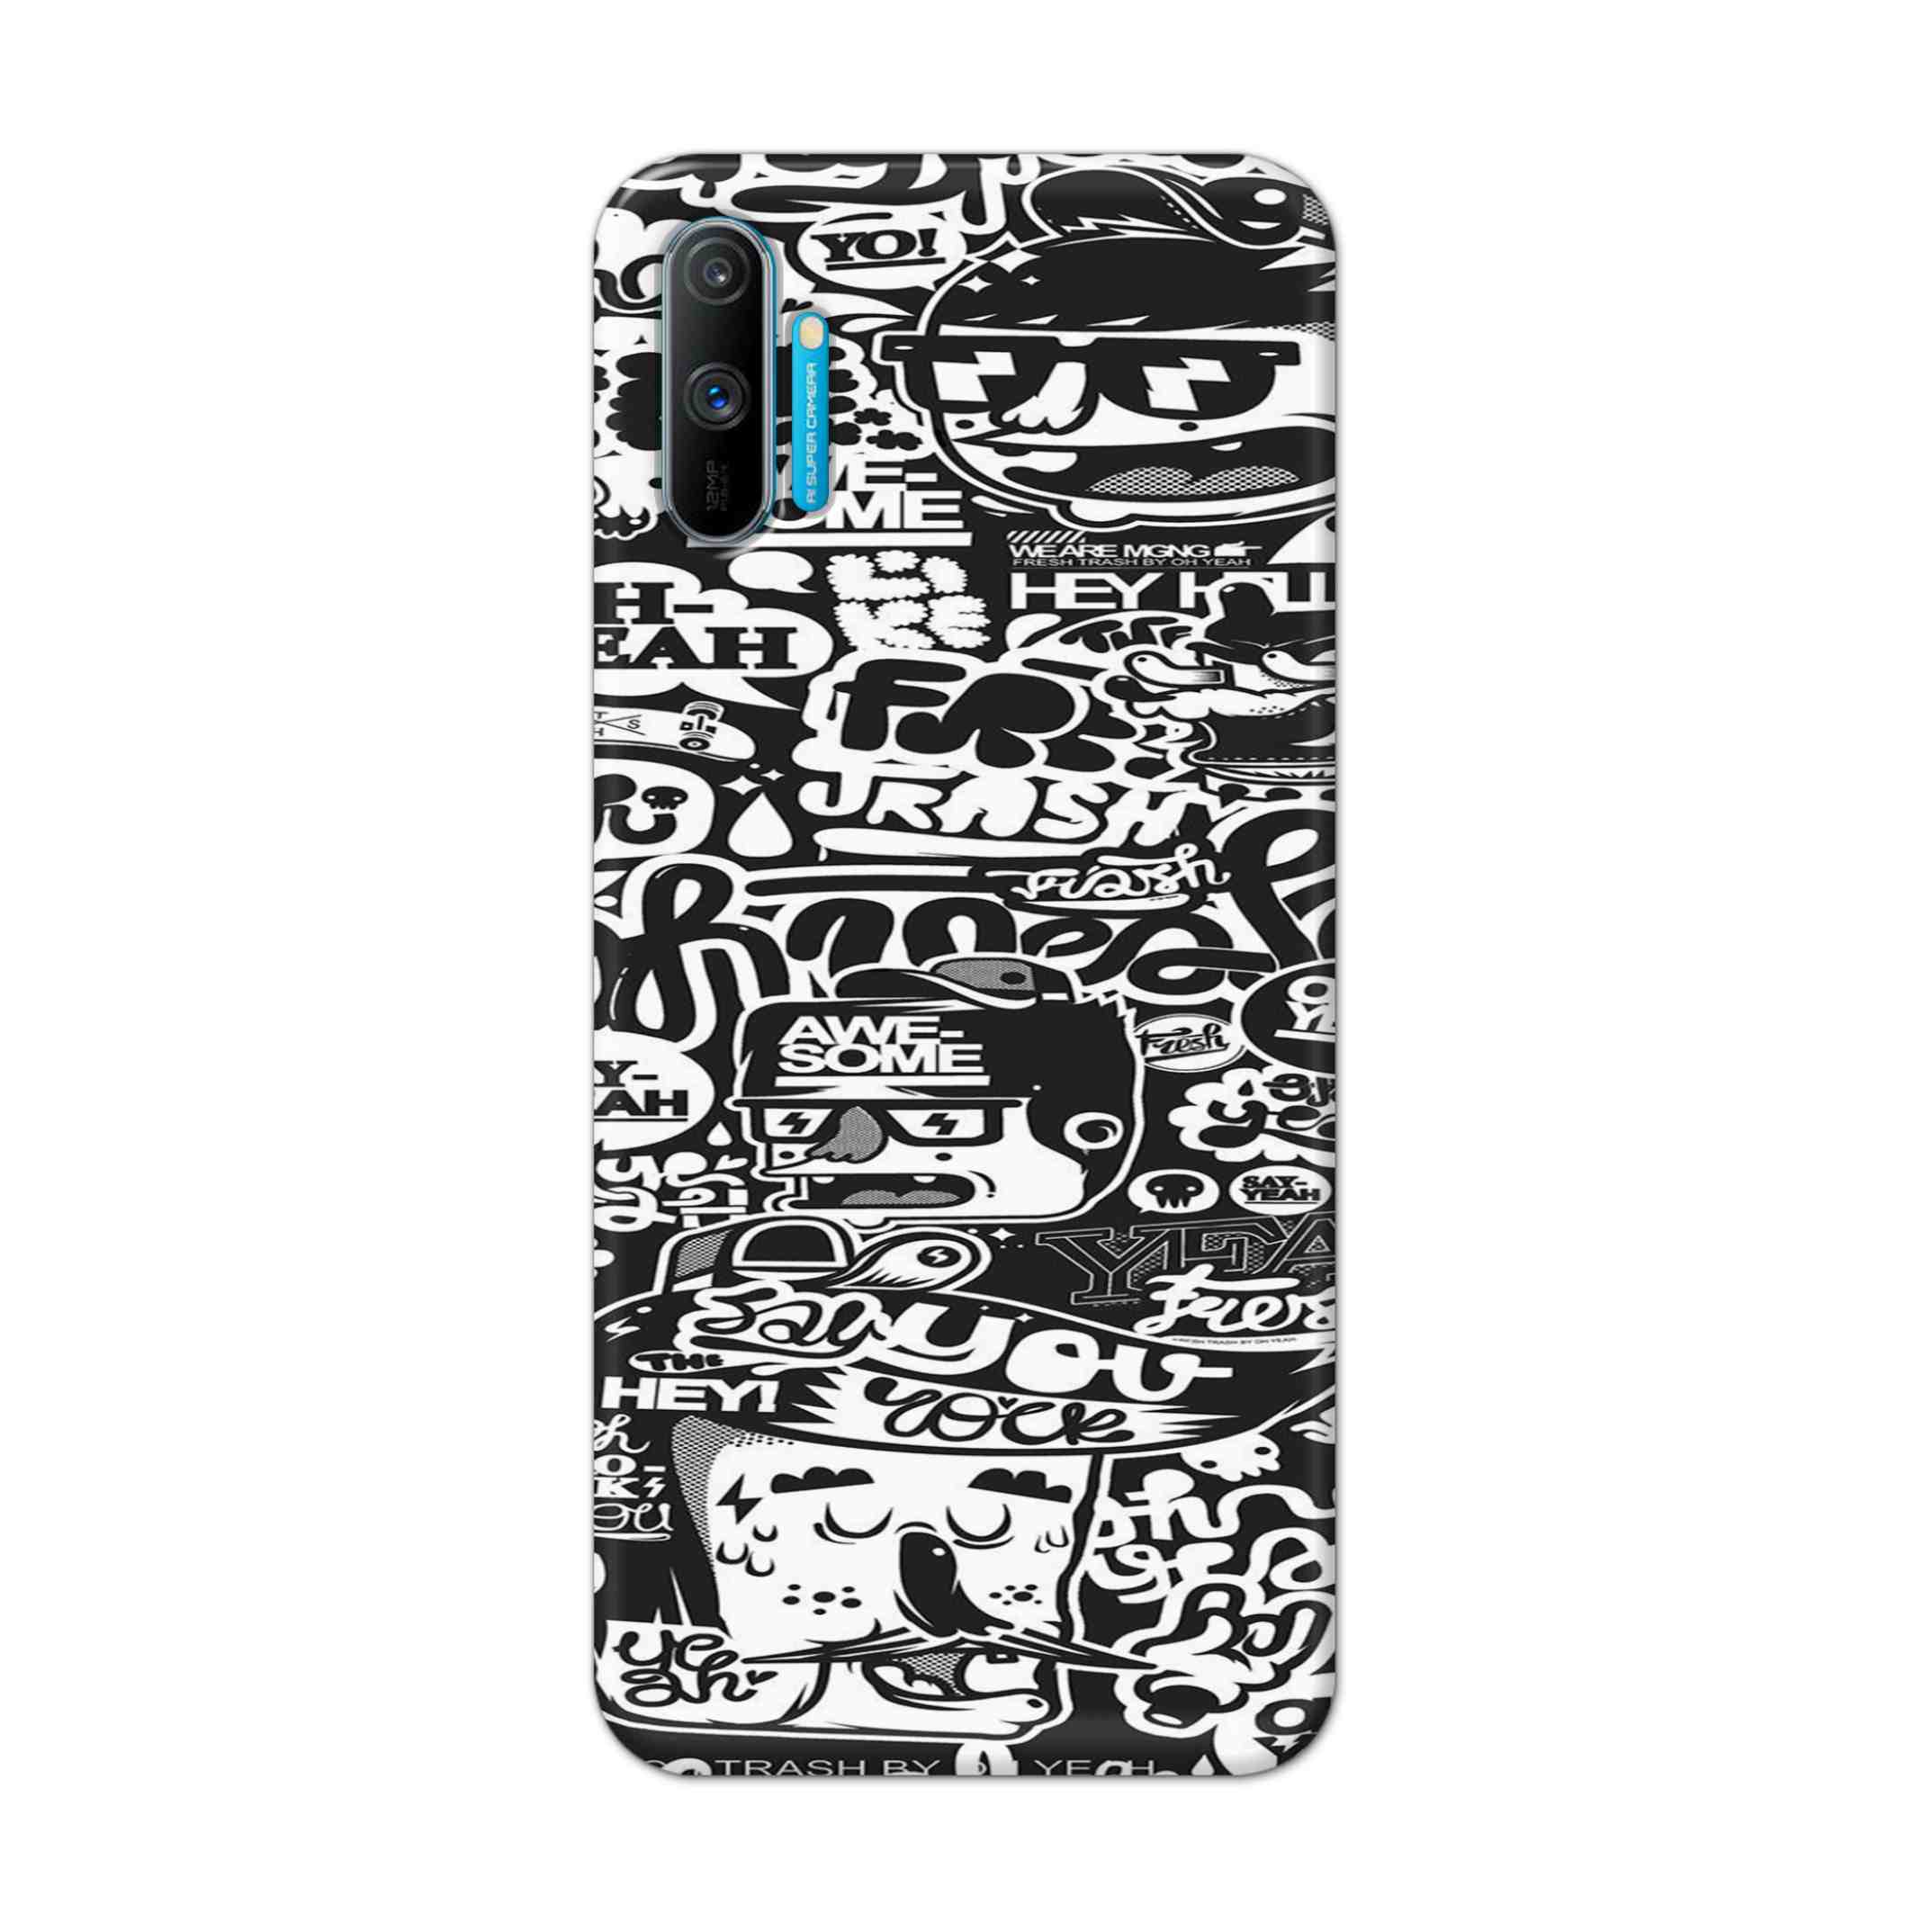 Buy Awesome Hard Back Mobile Phone Case Cover For Realme C3 Online